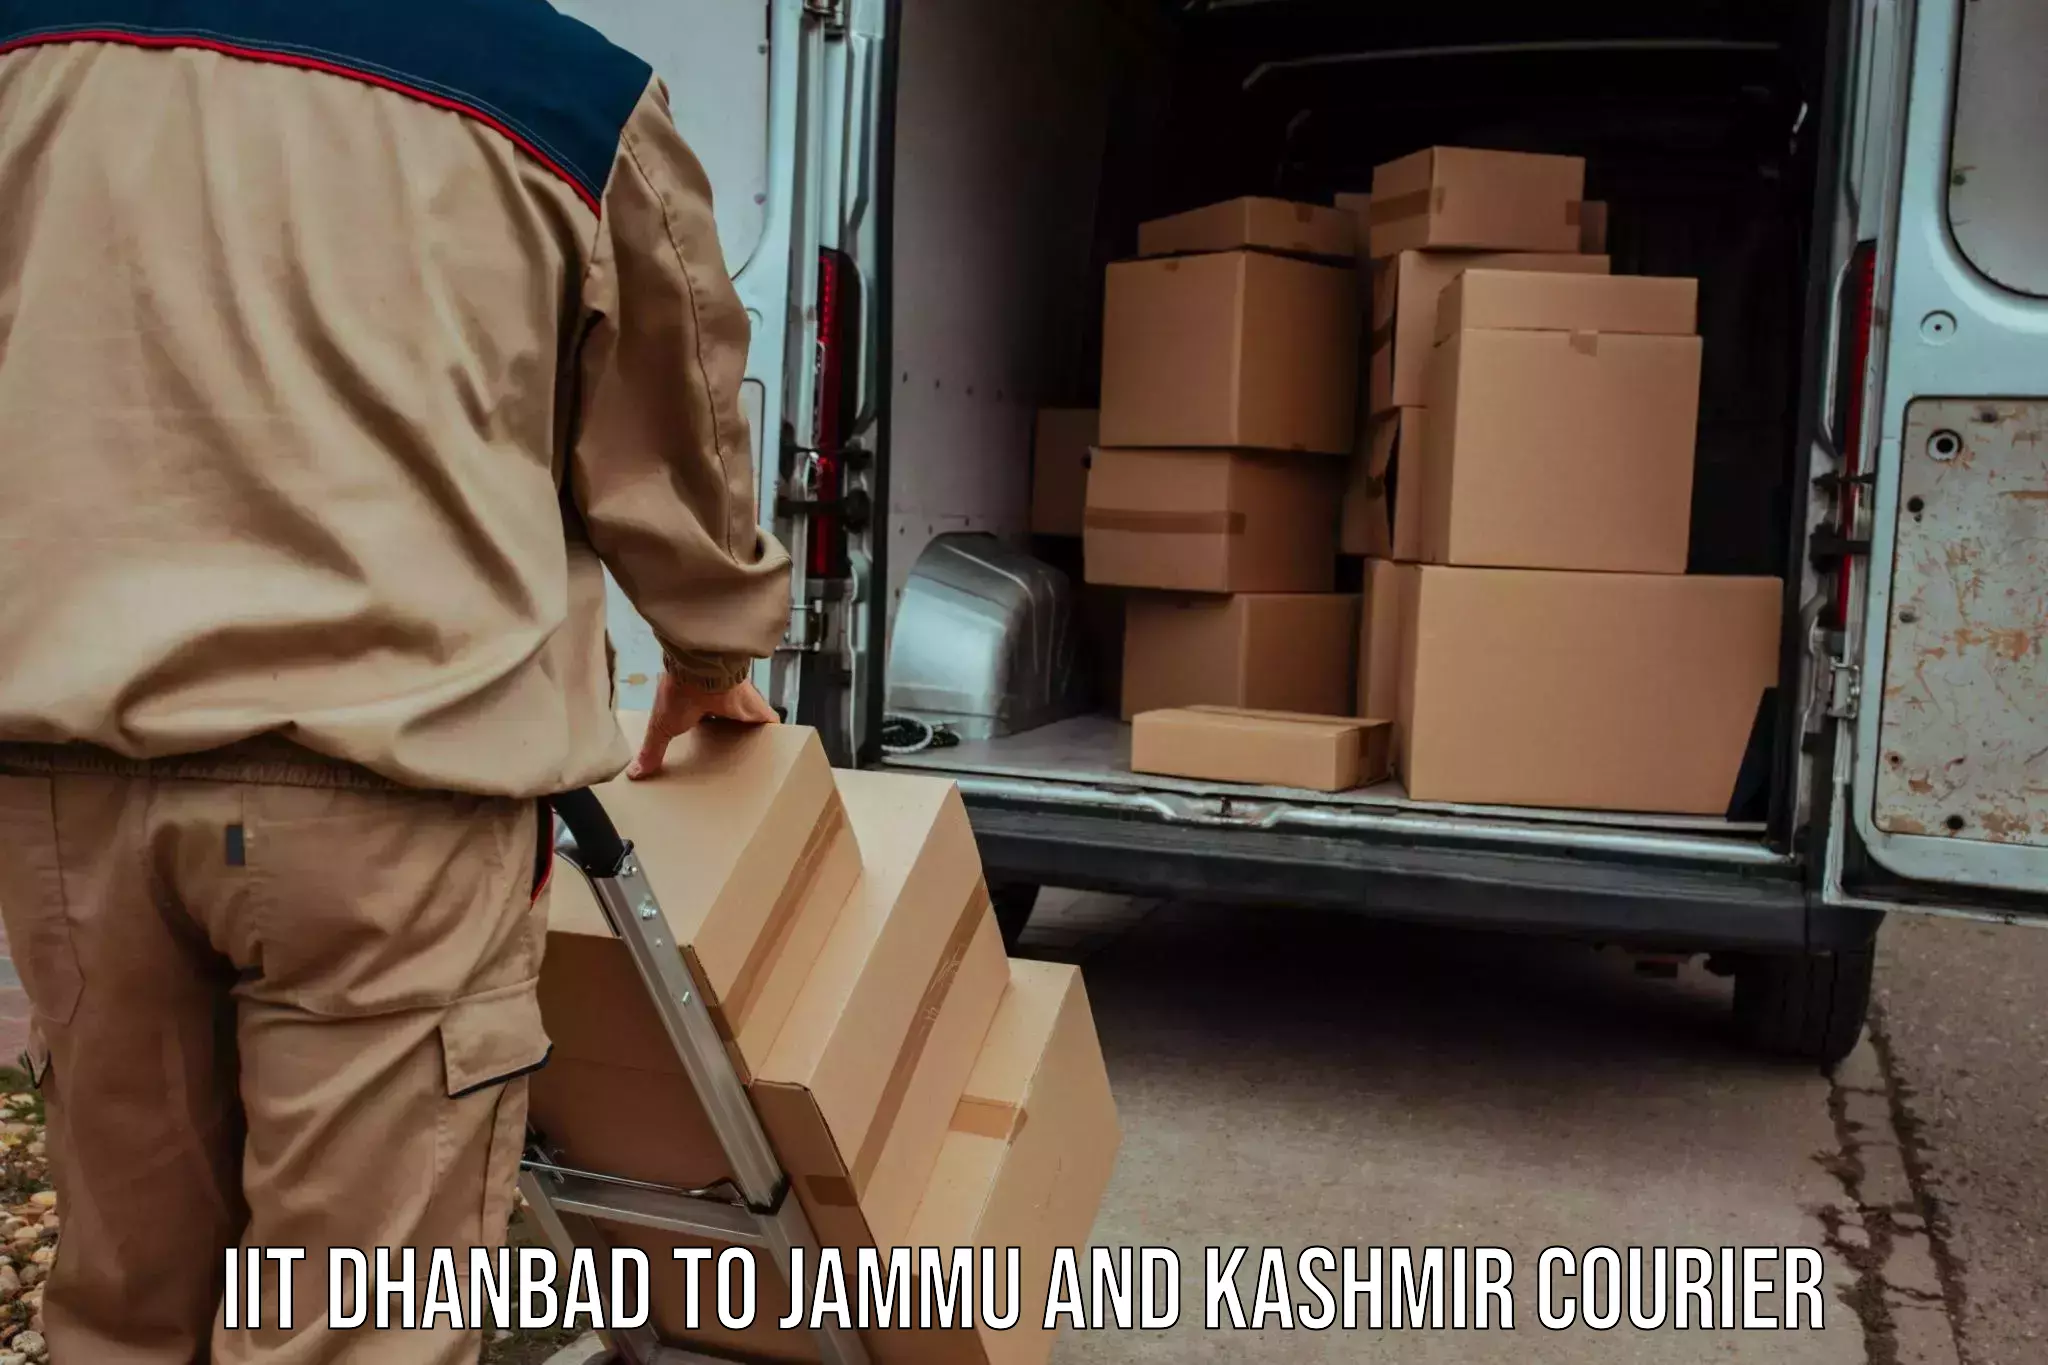 24-hour delivery options IIT Dhanbad to Udhampur